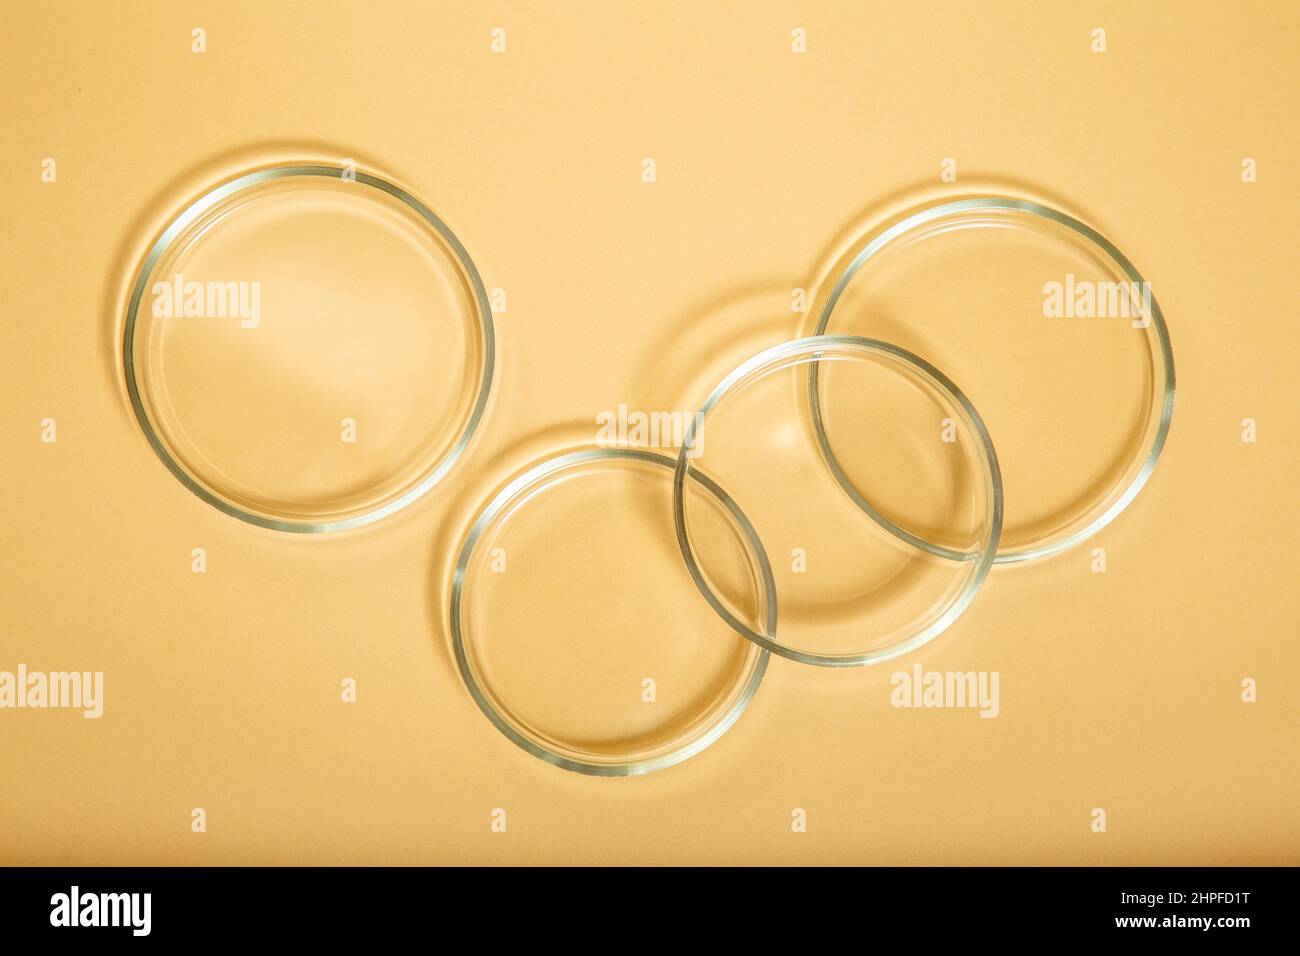 Laboratory glassware for bio science, organic skin care products, cosmetic research. Clean empty petri dishes on beige nude background. Top view Stock Photo